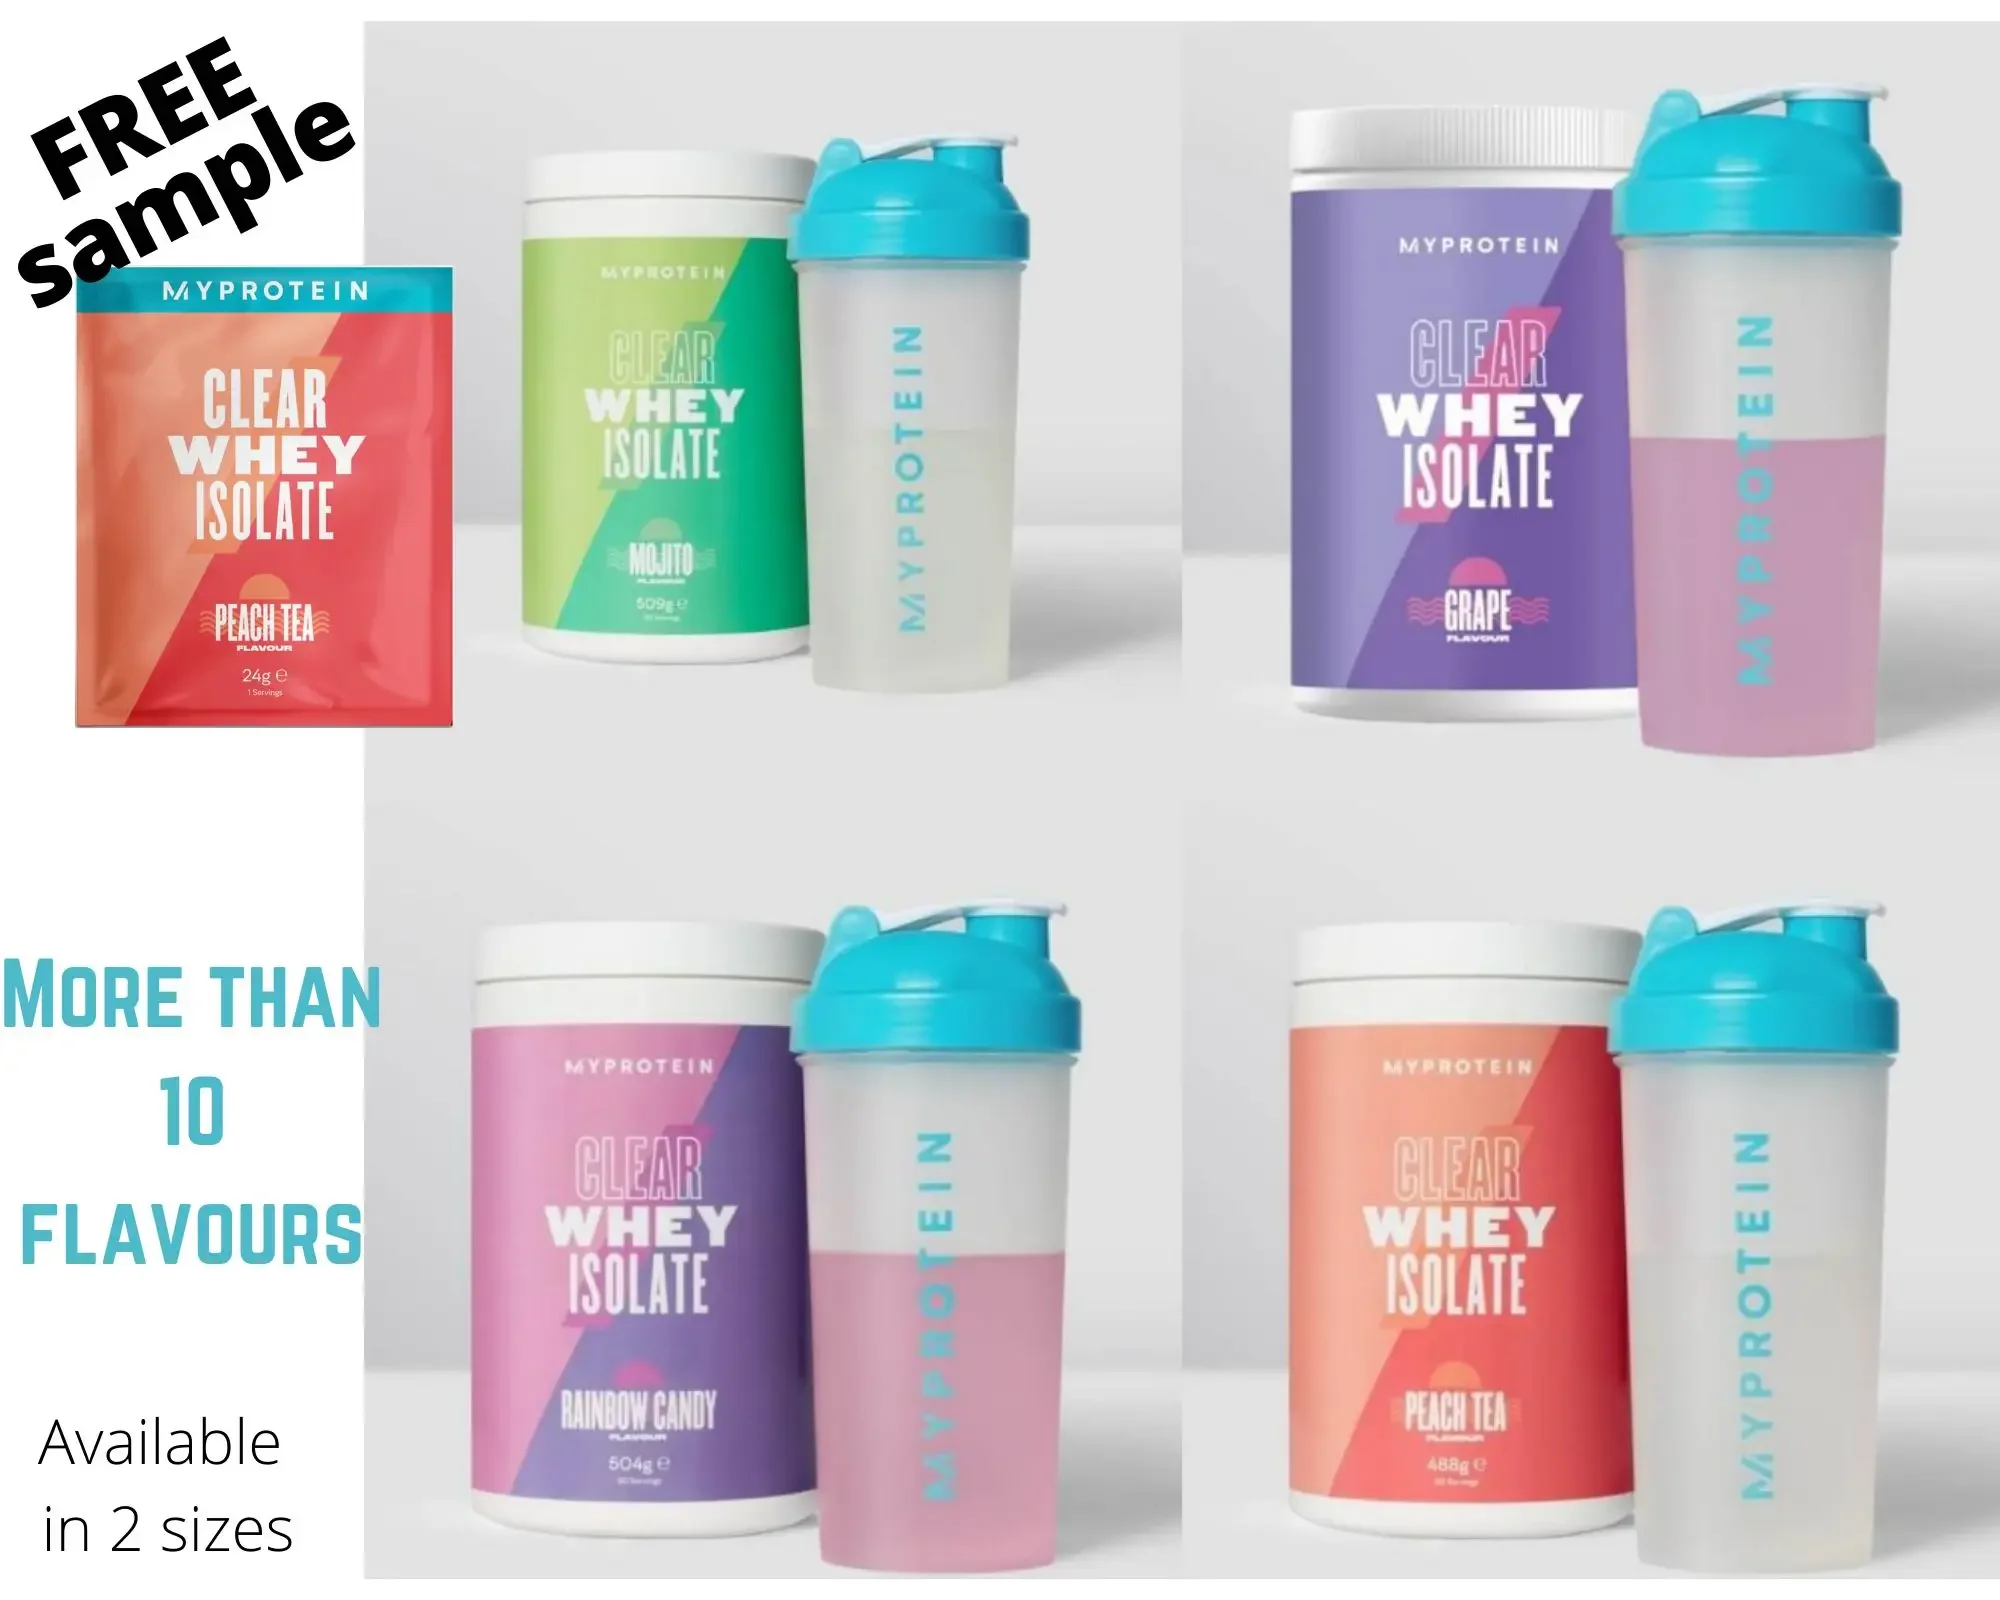 Clear Whey Isolate myprotein